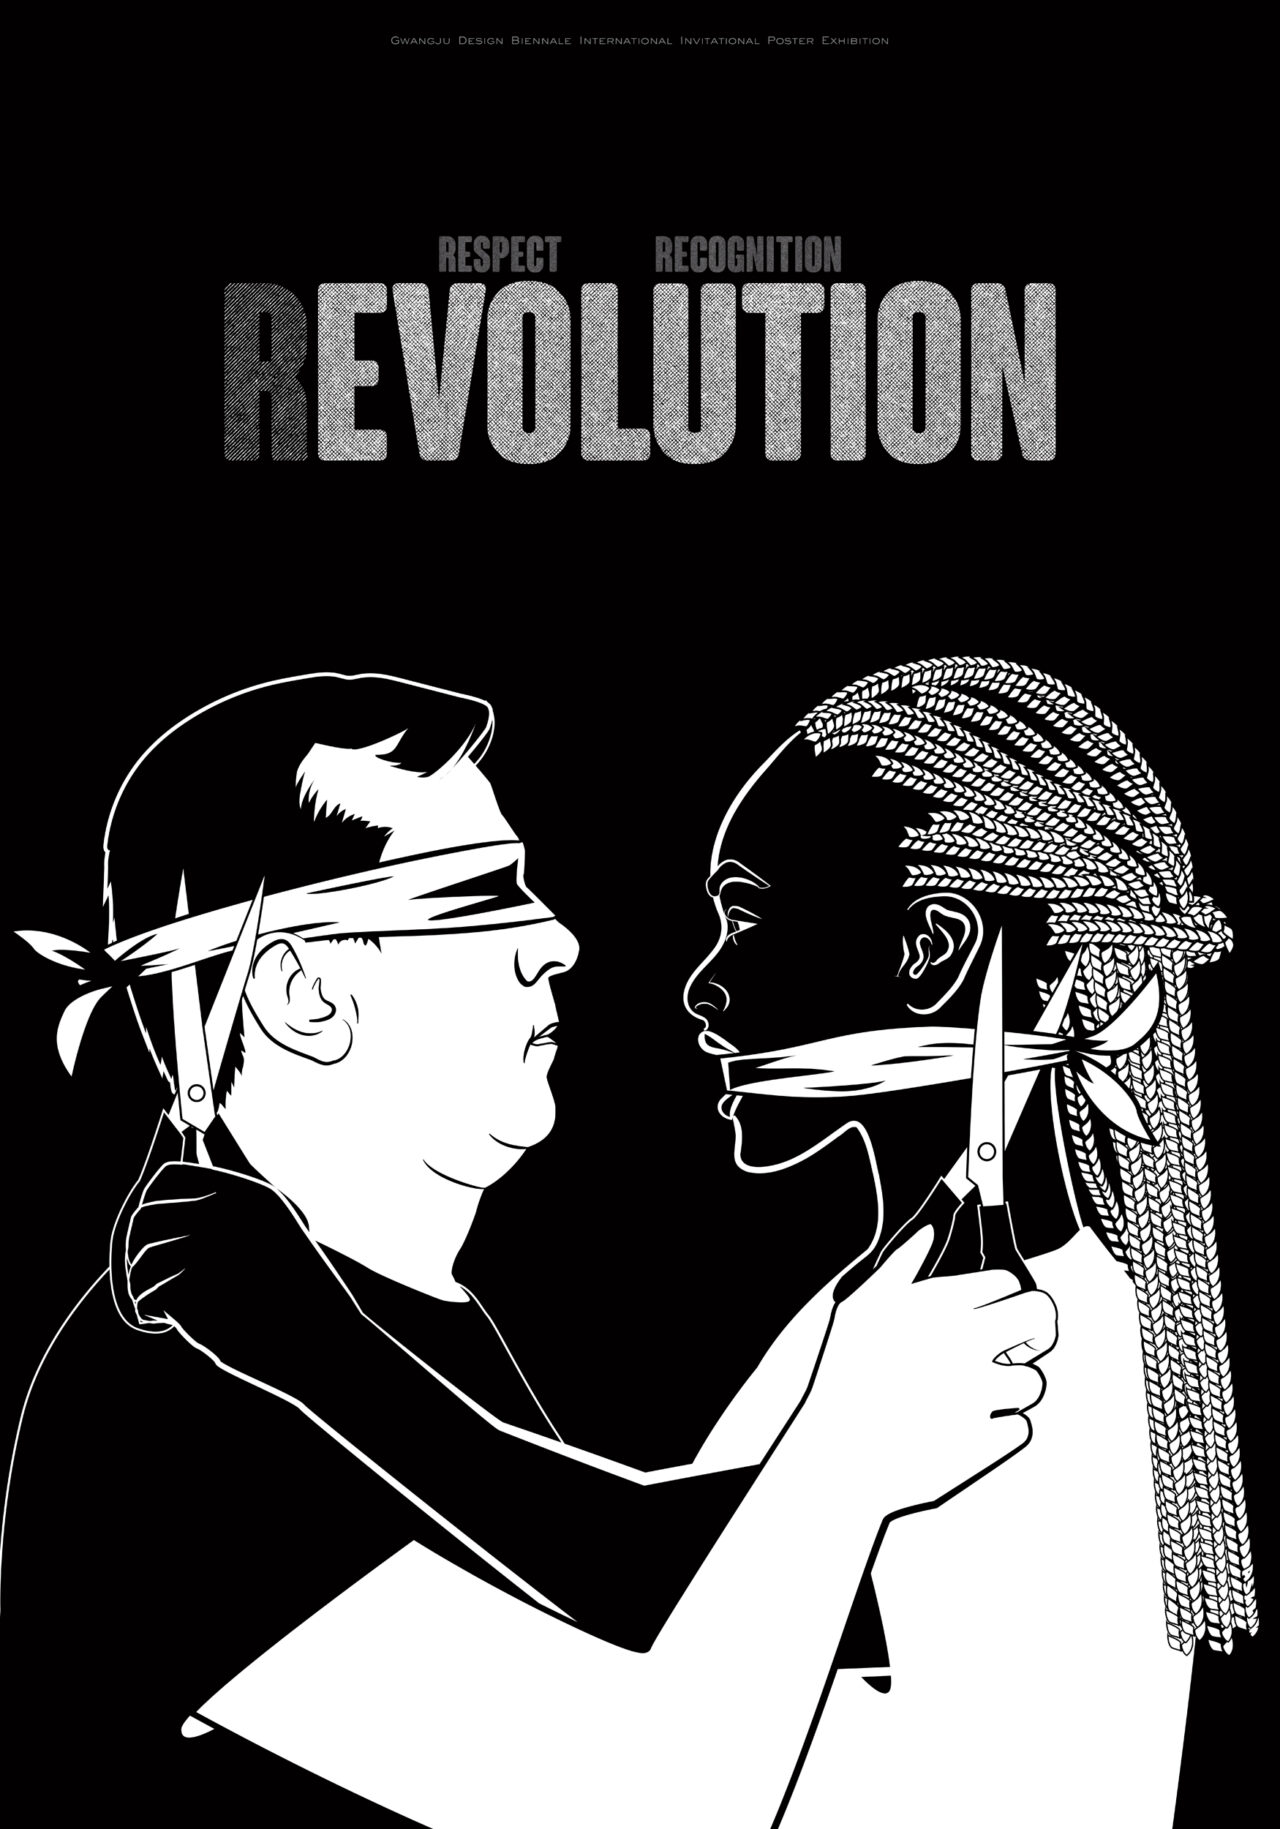 rEvolution by Erin Wright